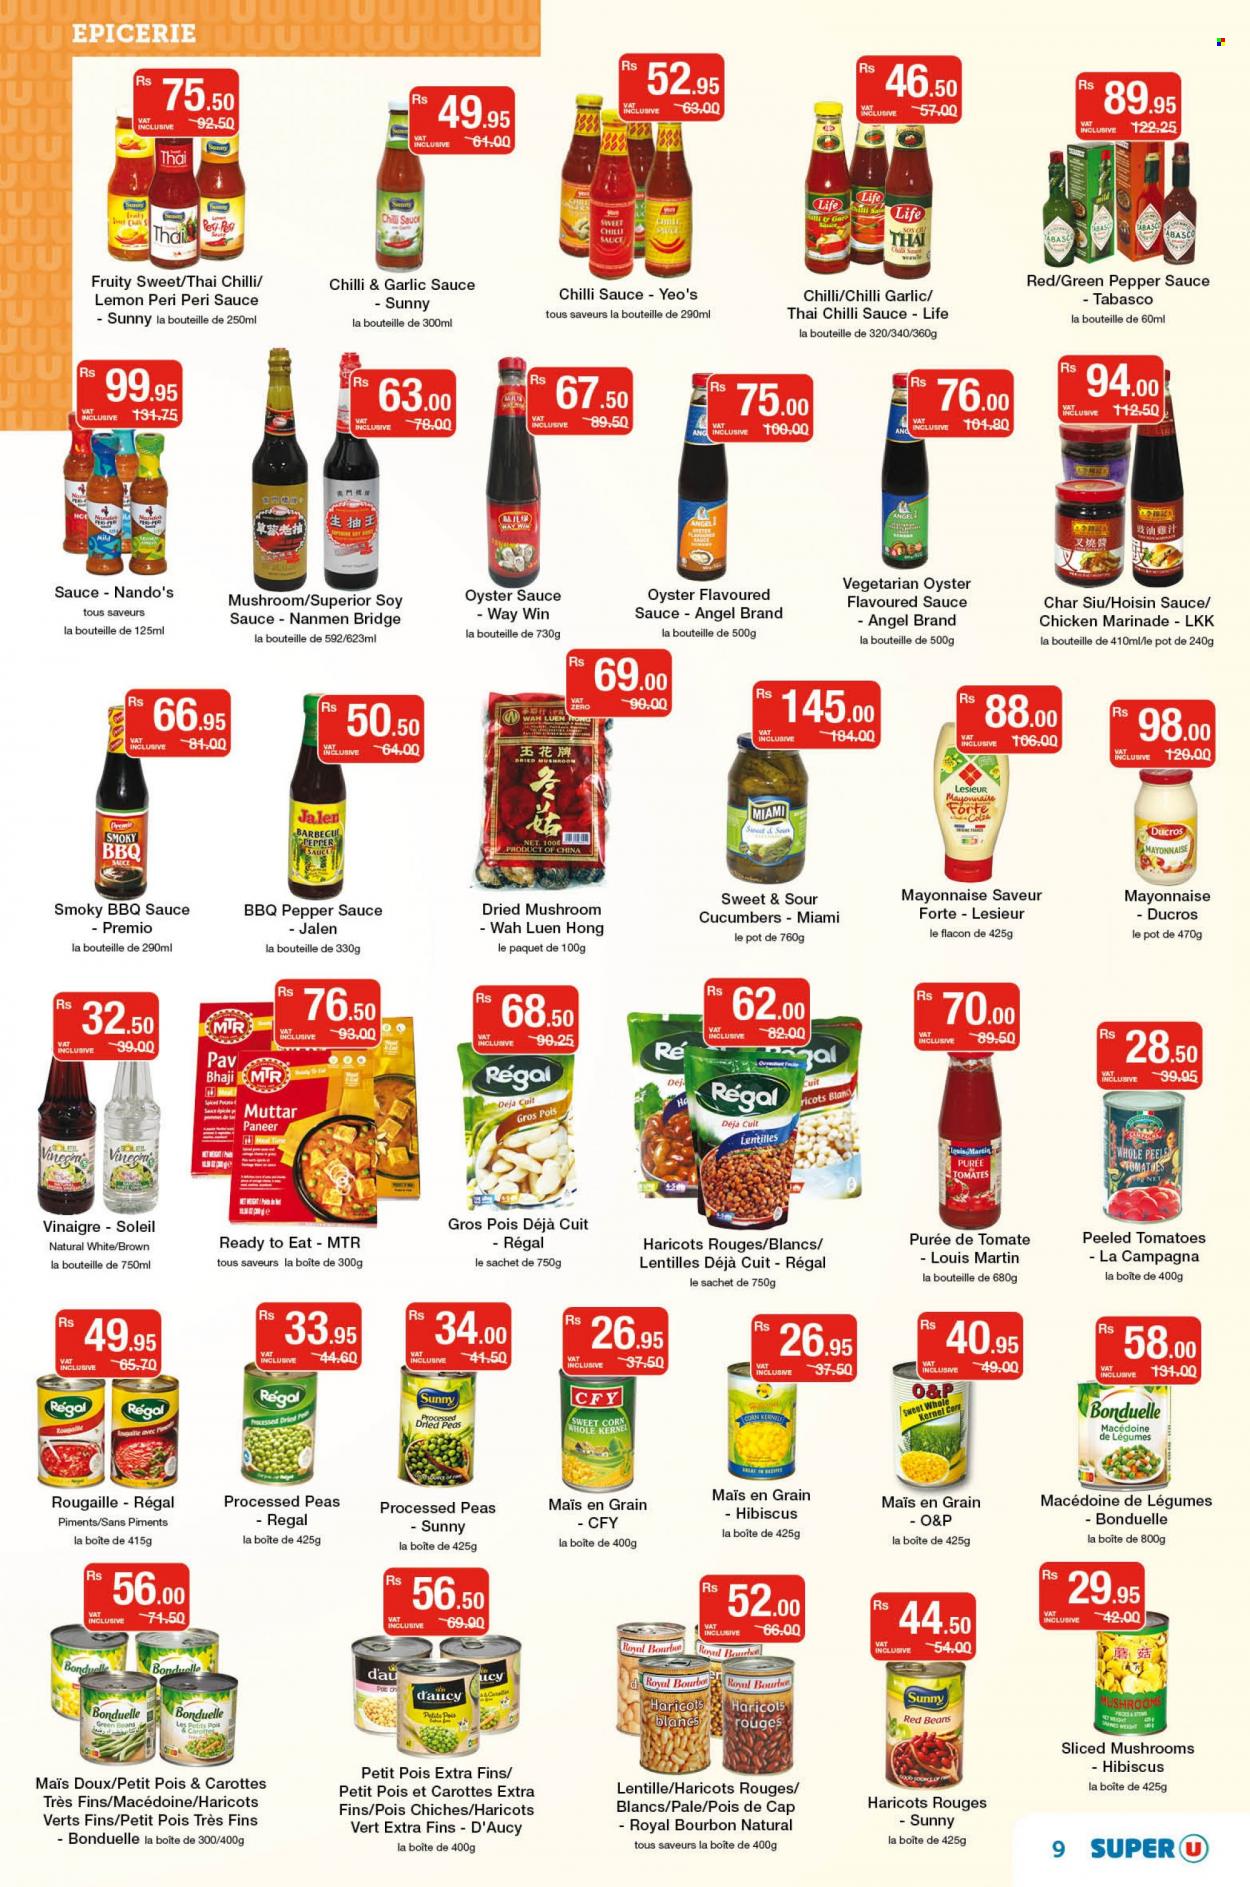 thumbnail - Super U Catalogue - 23.09.2022 - 6.10.2022 - Sales products - mushrooms, beans, corn, green beans, tomatoes, peas, sweet corn, green pepper, oysters, sauce, MTR, paneer, mayonnaise, tabasco, red beans, BBQ sauce, soy sauce, hoisin sauce, oyster sauce, chilli sauce, marinade, sweet chilli sauce, peri peri sauce, garlic sauce, vinegar, bourbon, pot. Page 9.